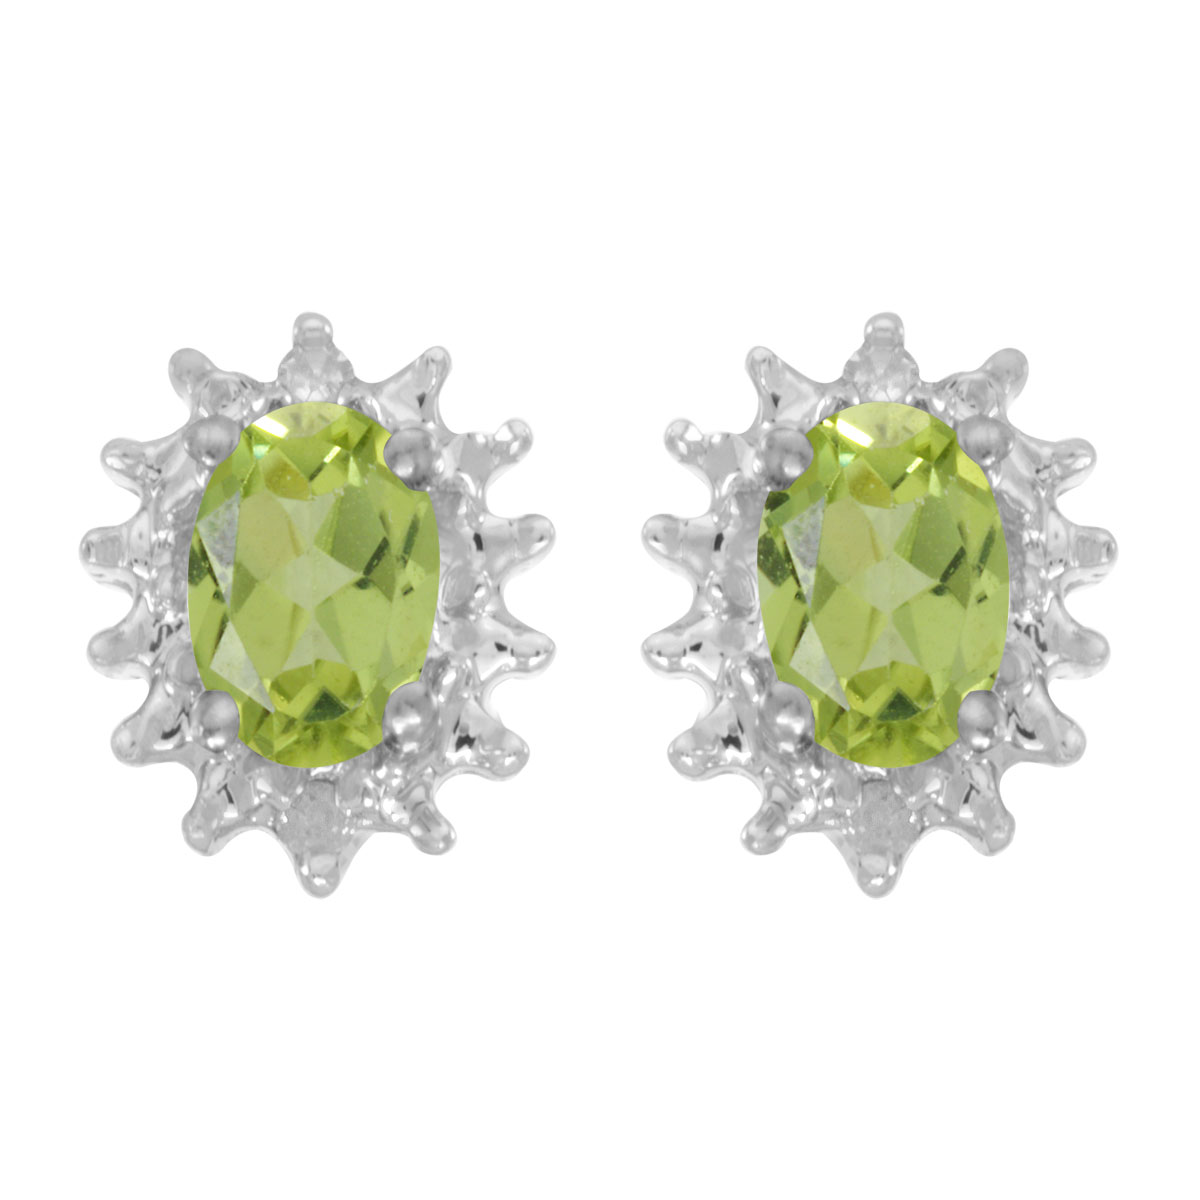 These 14k white gold oval peridot and diamond earrings feature 6x4 mm genuine natural peridots wi...